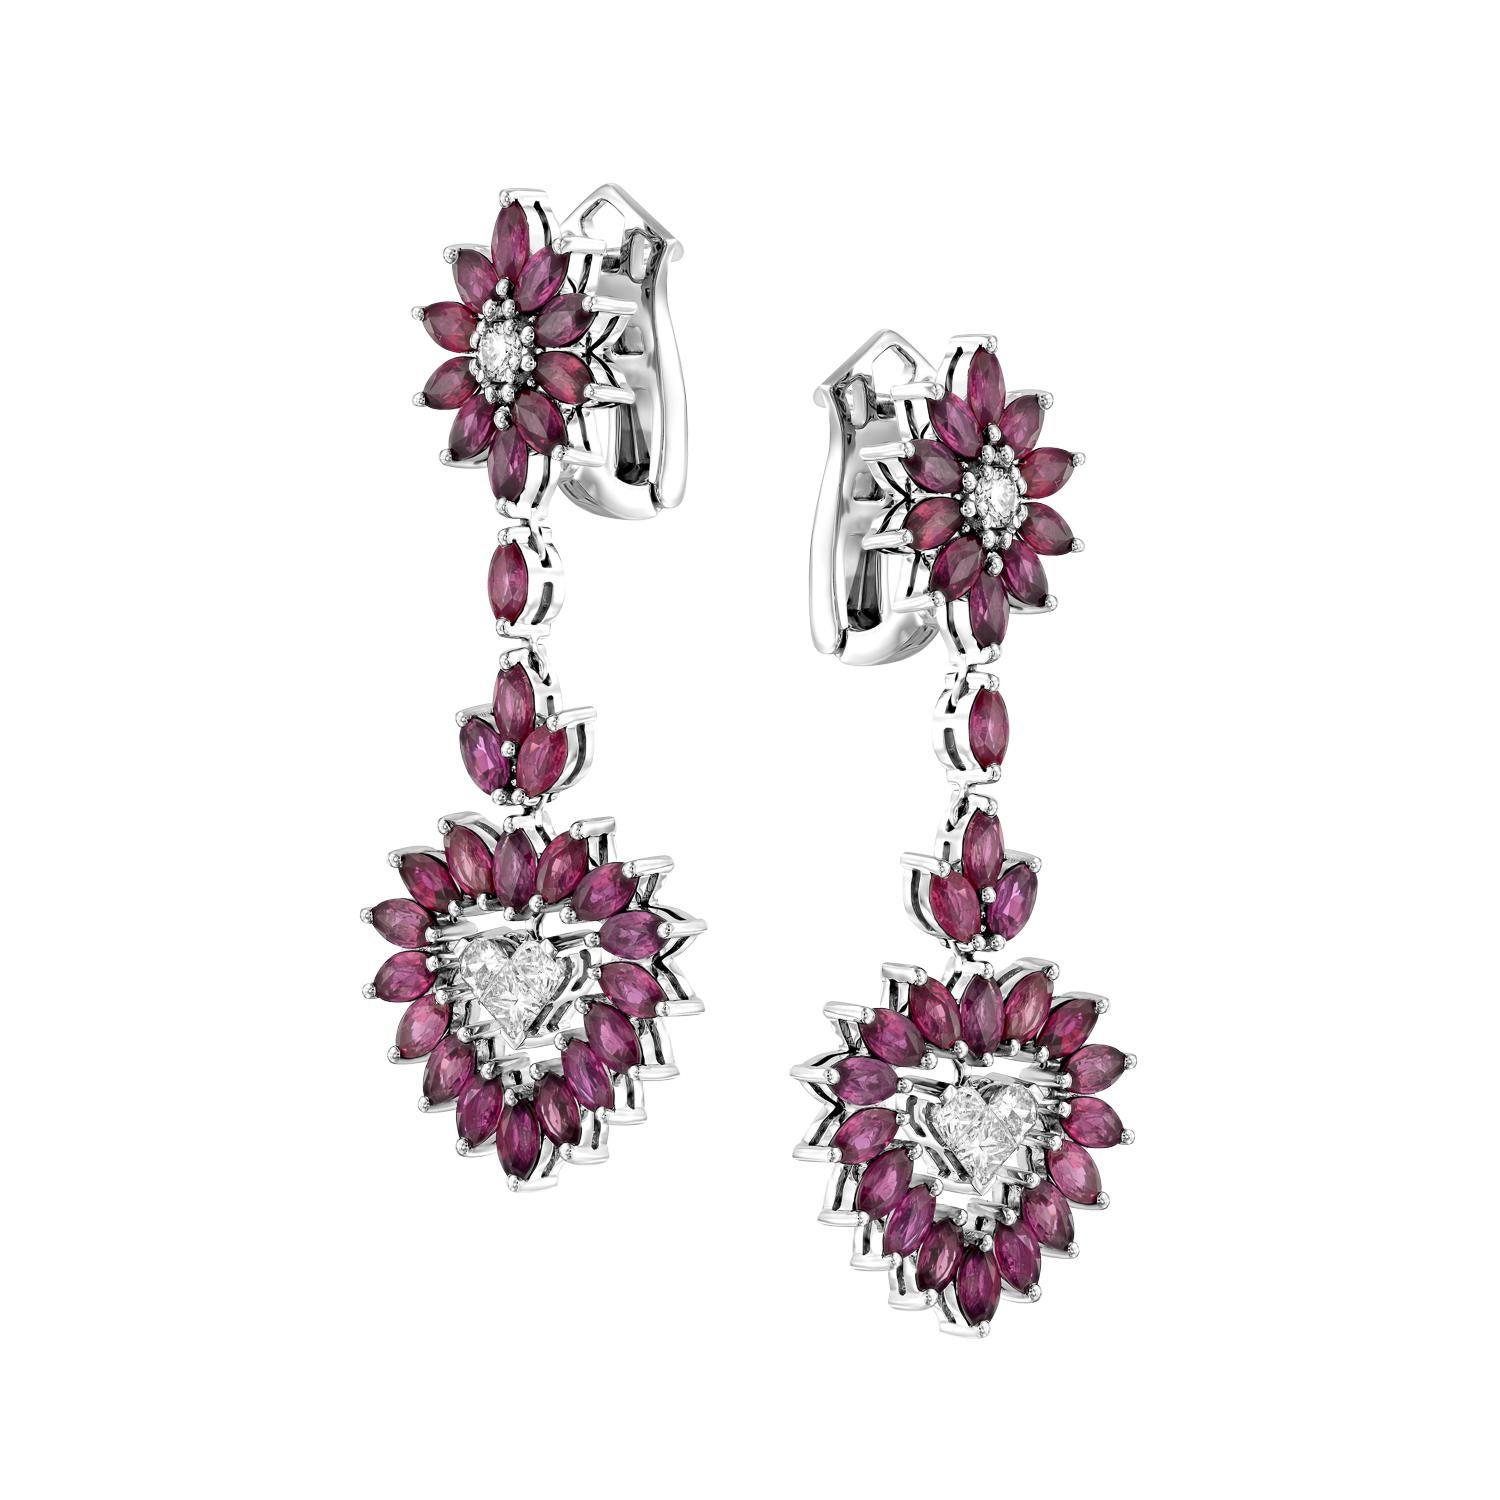 Experience the beauty and joy of life with the Geraldo Ruby Diamond Heart Earrings, a true masterpiece of jewelry design. These stunning earrings feature 7.06 carats of vibrant rubies and 1.85 carats of round diamonds, all set in a combination of